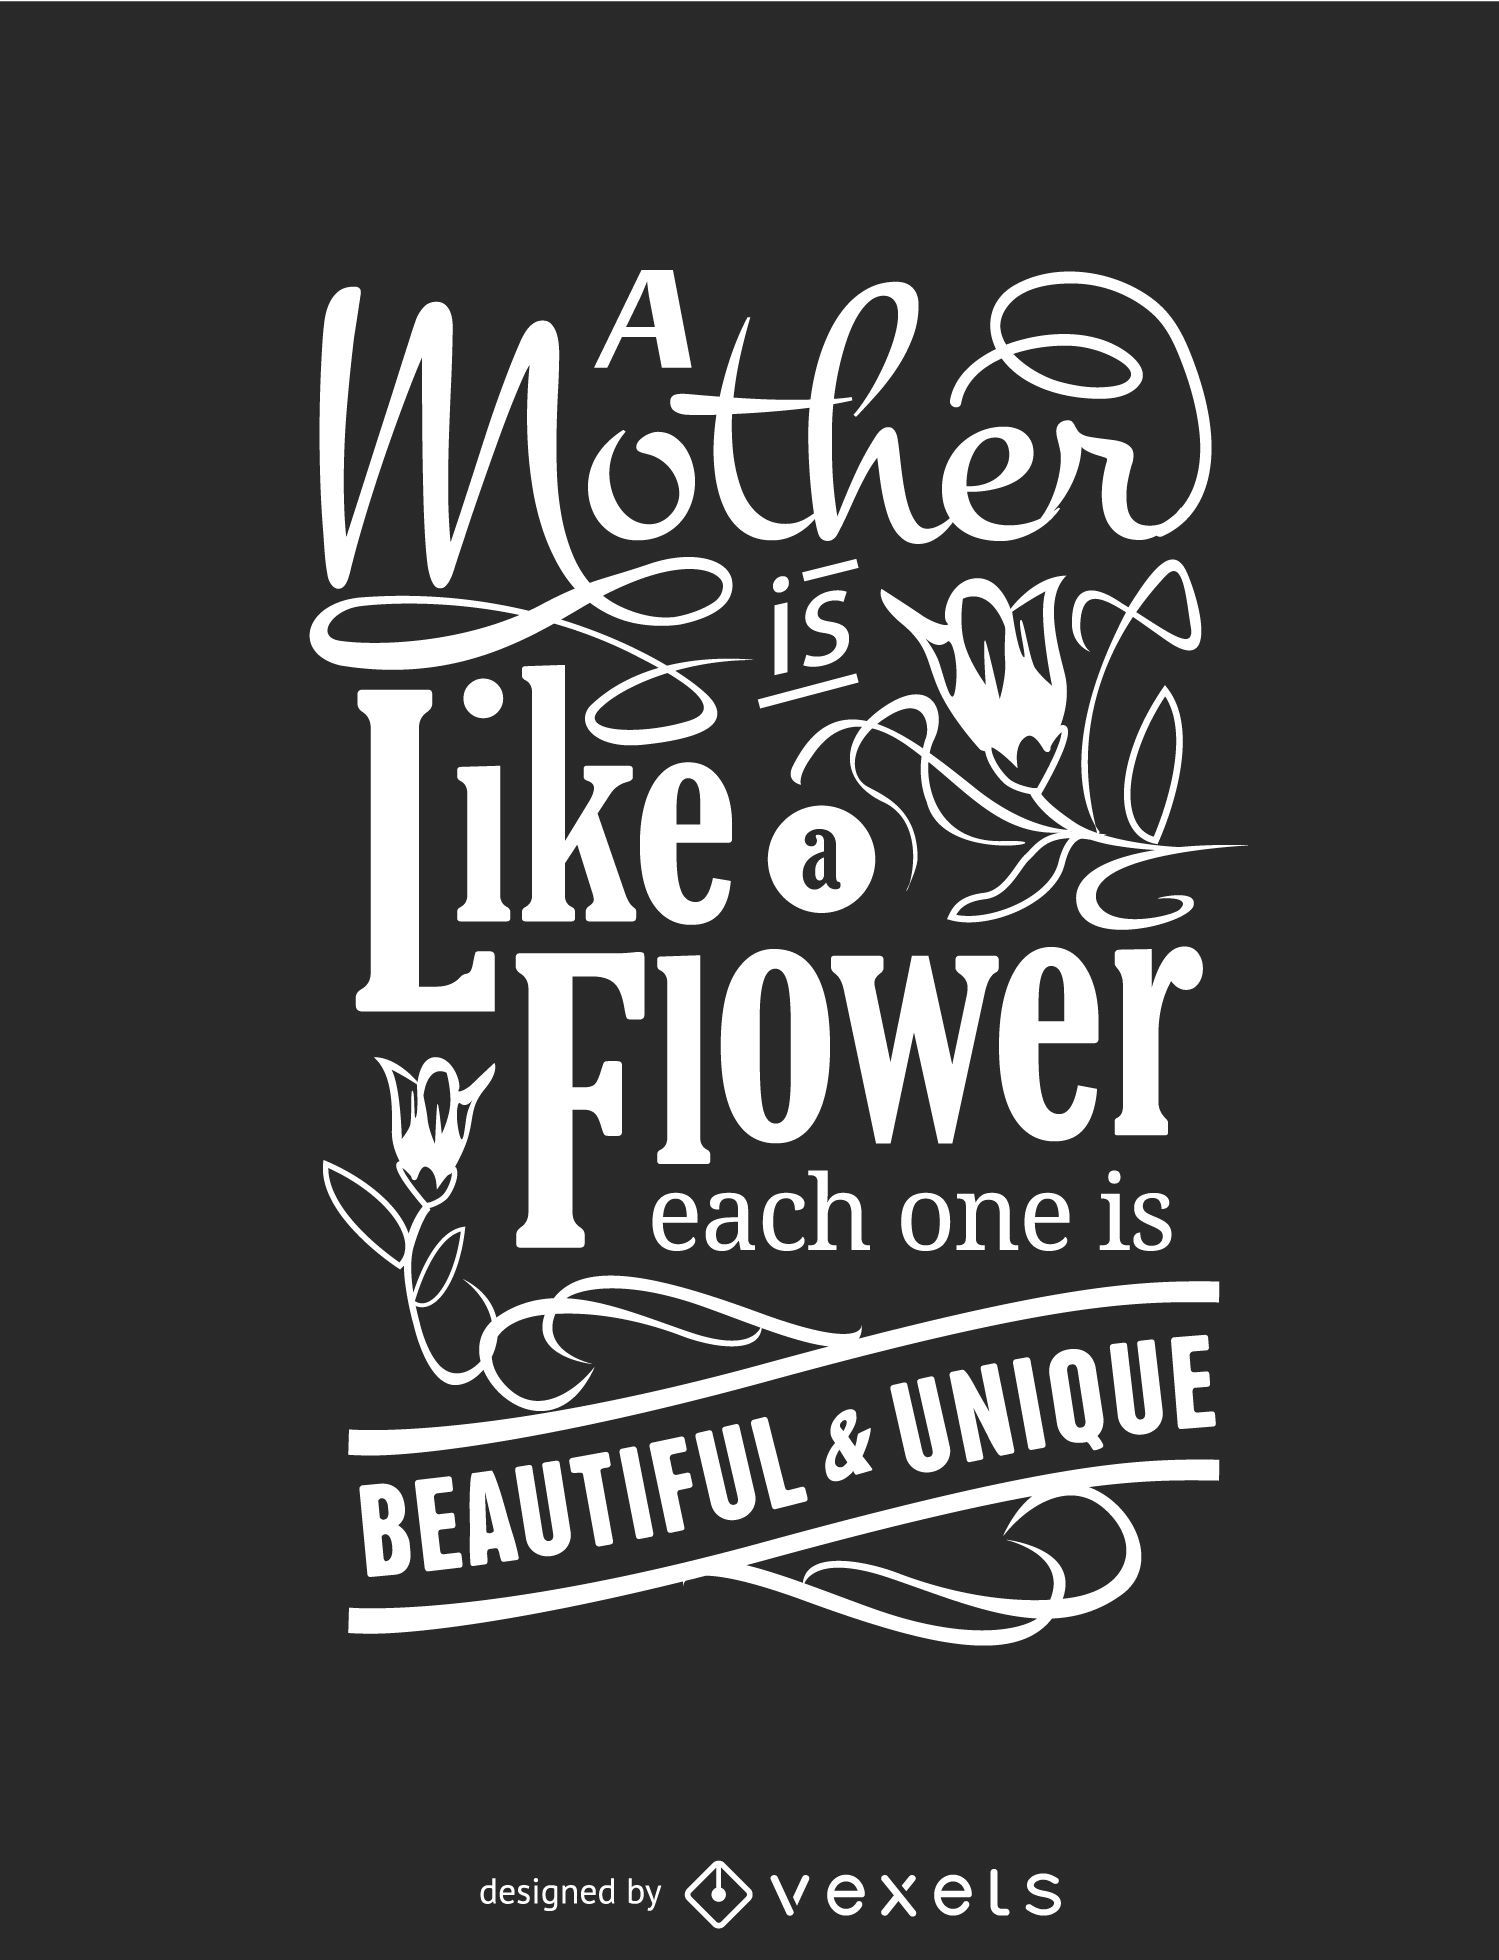 Download Mother's Day typographic poster - Vector download